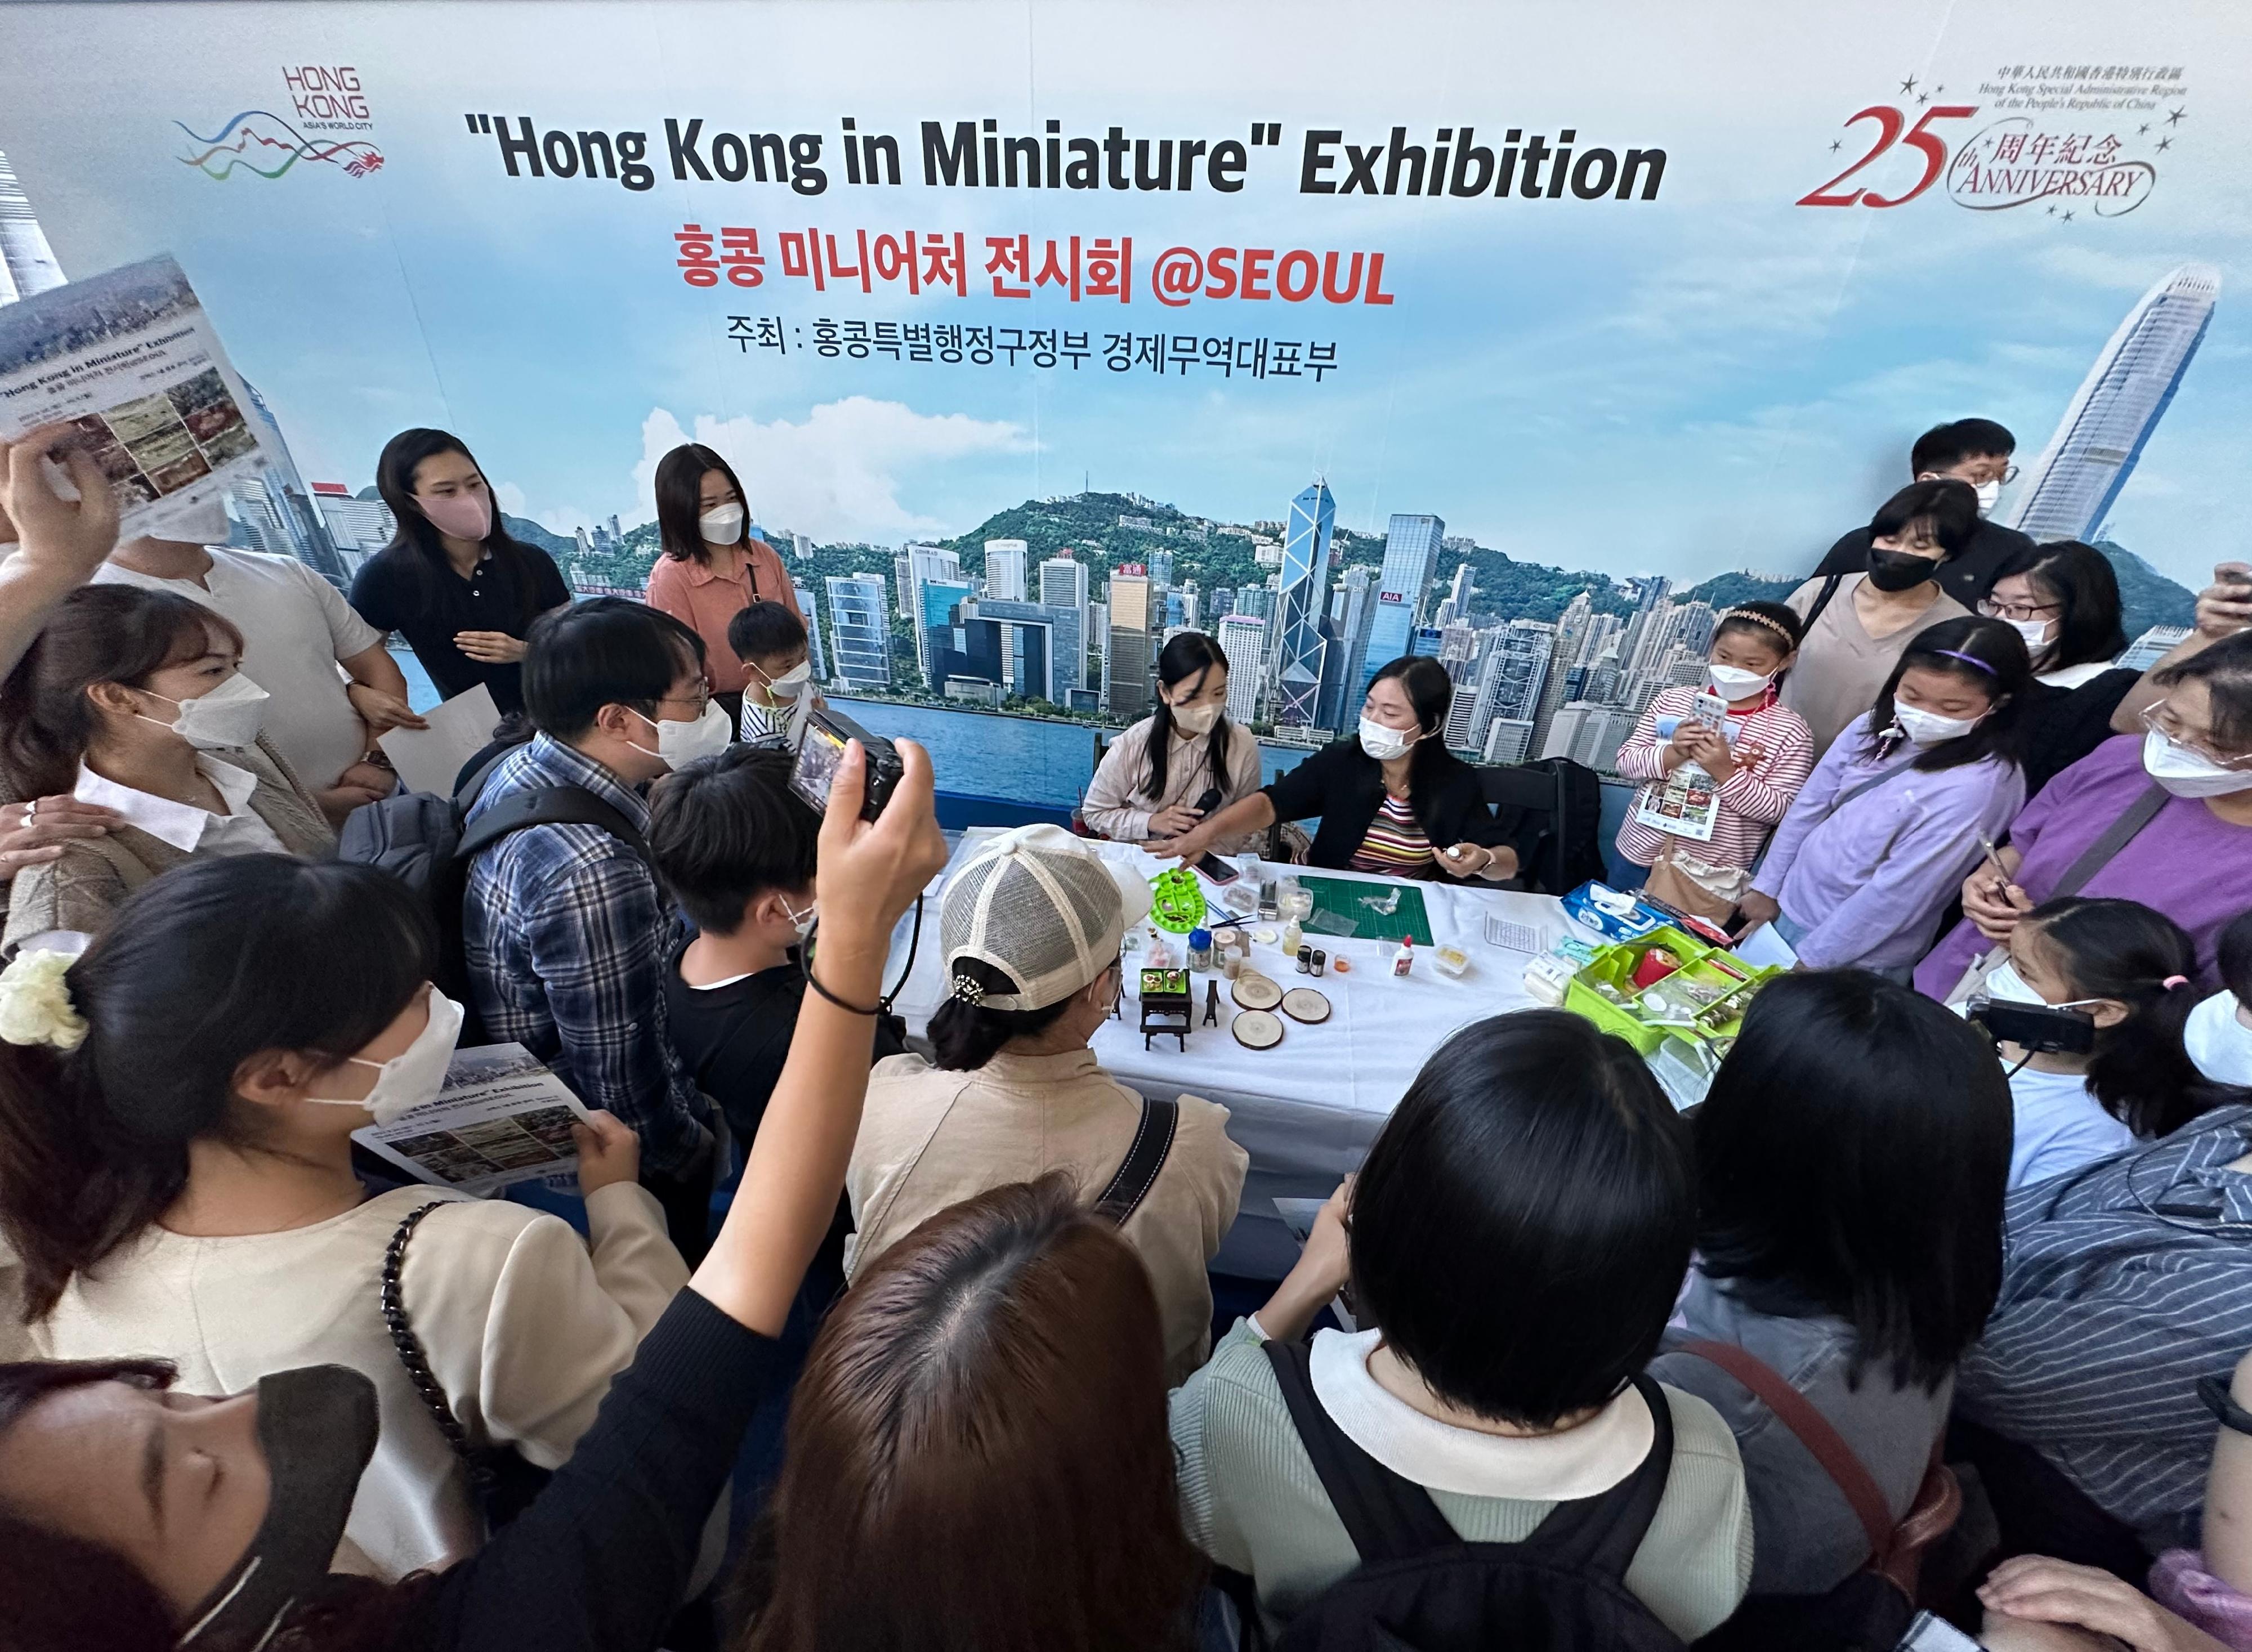 The "Hong Kong in Miniature" Exhibition @Seoul 2022, which showcases 40 miniature models that capture the uniqueness and vibrancy of Hong Kong, opened in Seoul, Korea, today (September 24).  Demonstration sessions on how to create miniatures are held during weekends to promote cultural exchanges.